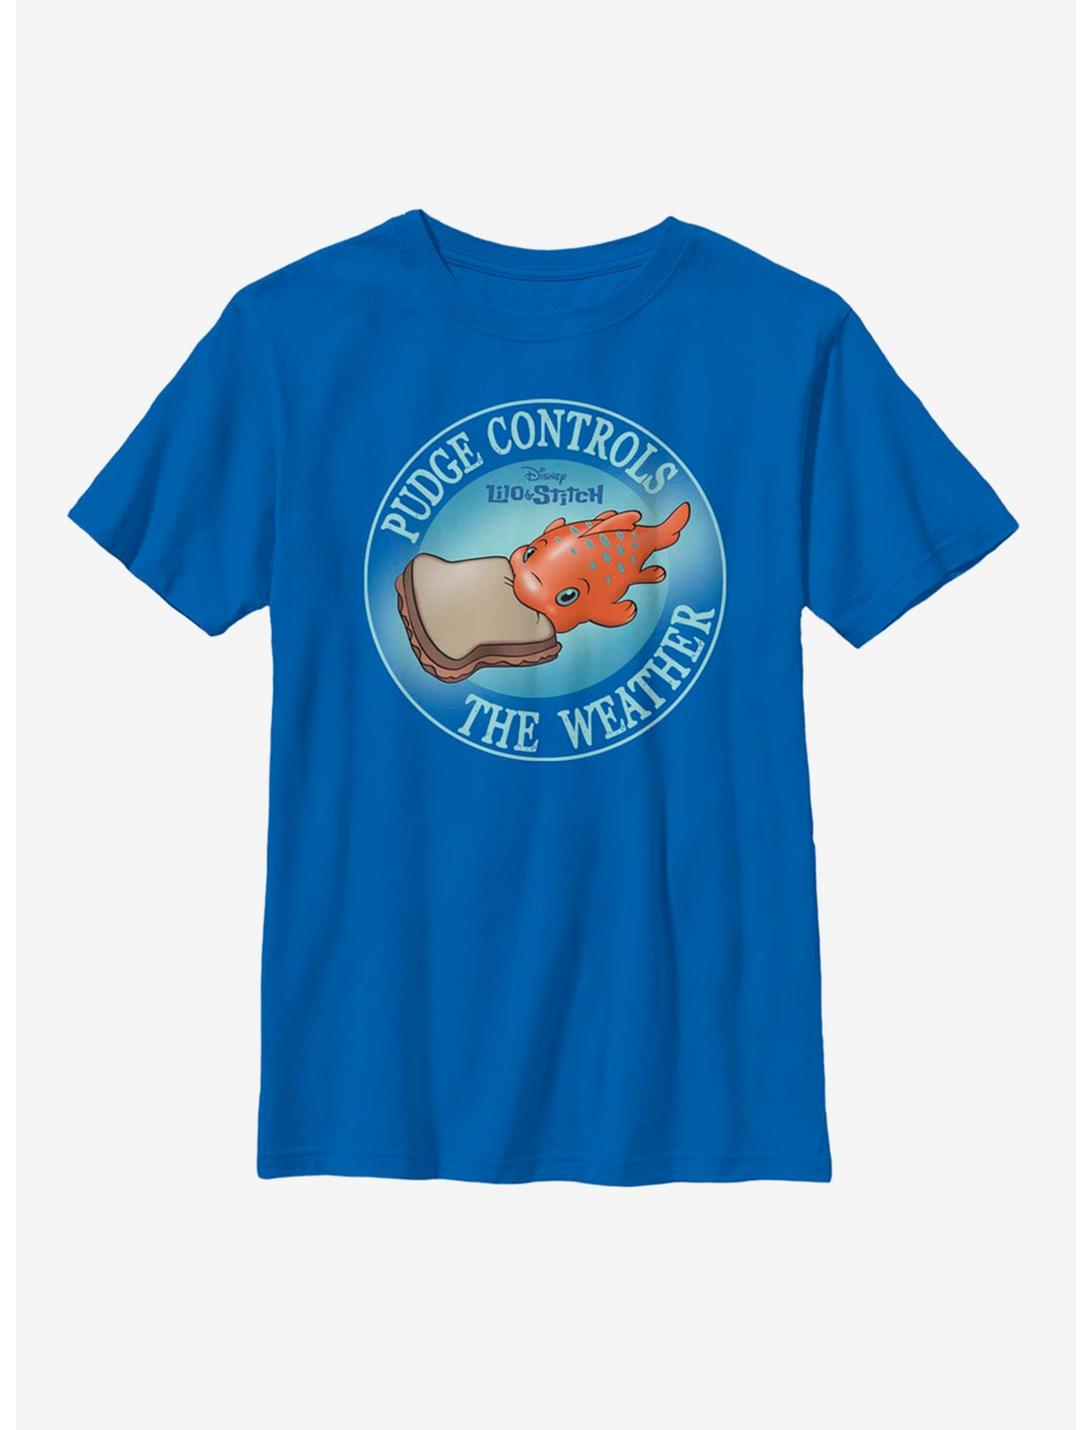 Disney Lilo & Stitch Pudge Controls The Weather Youth T-Shirt, ROYAL, hi-res